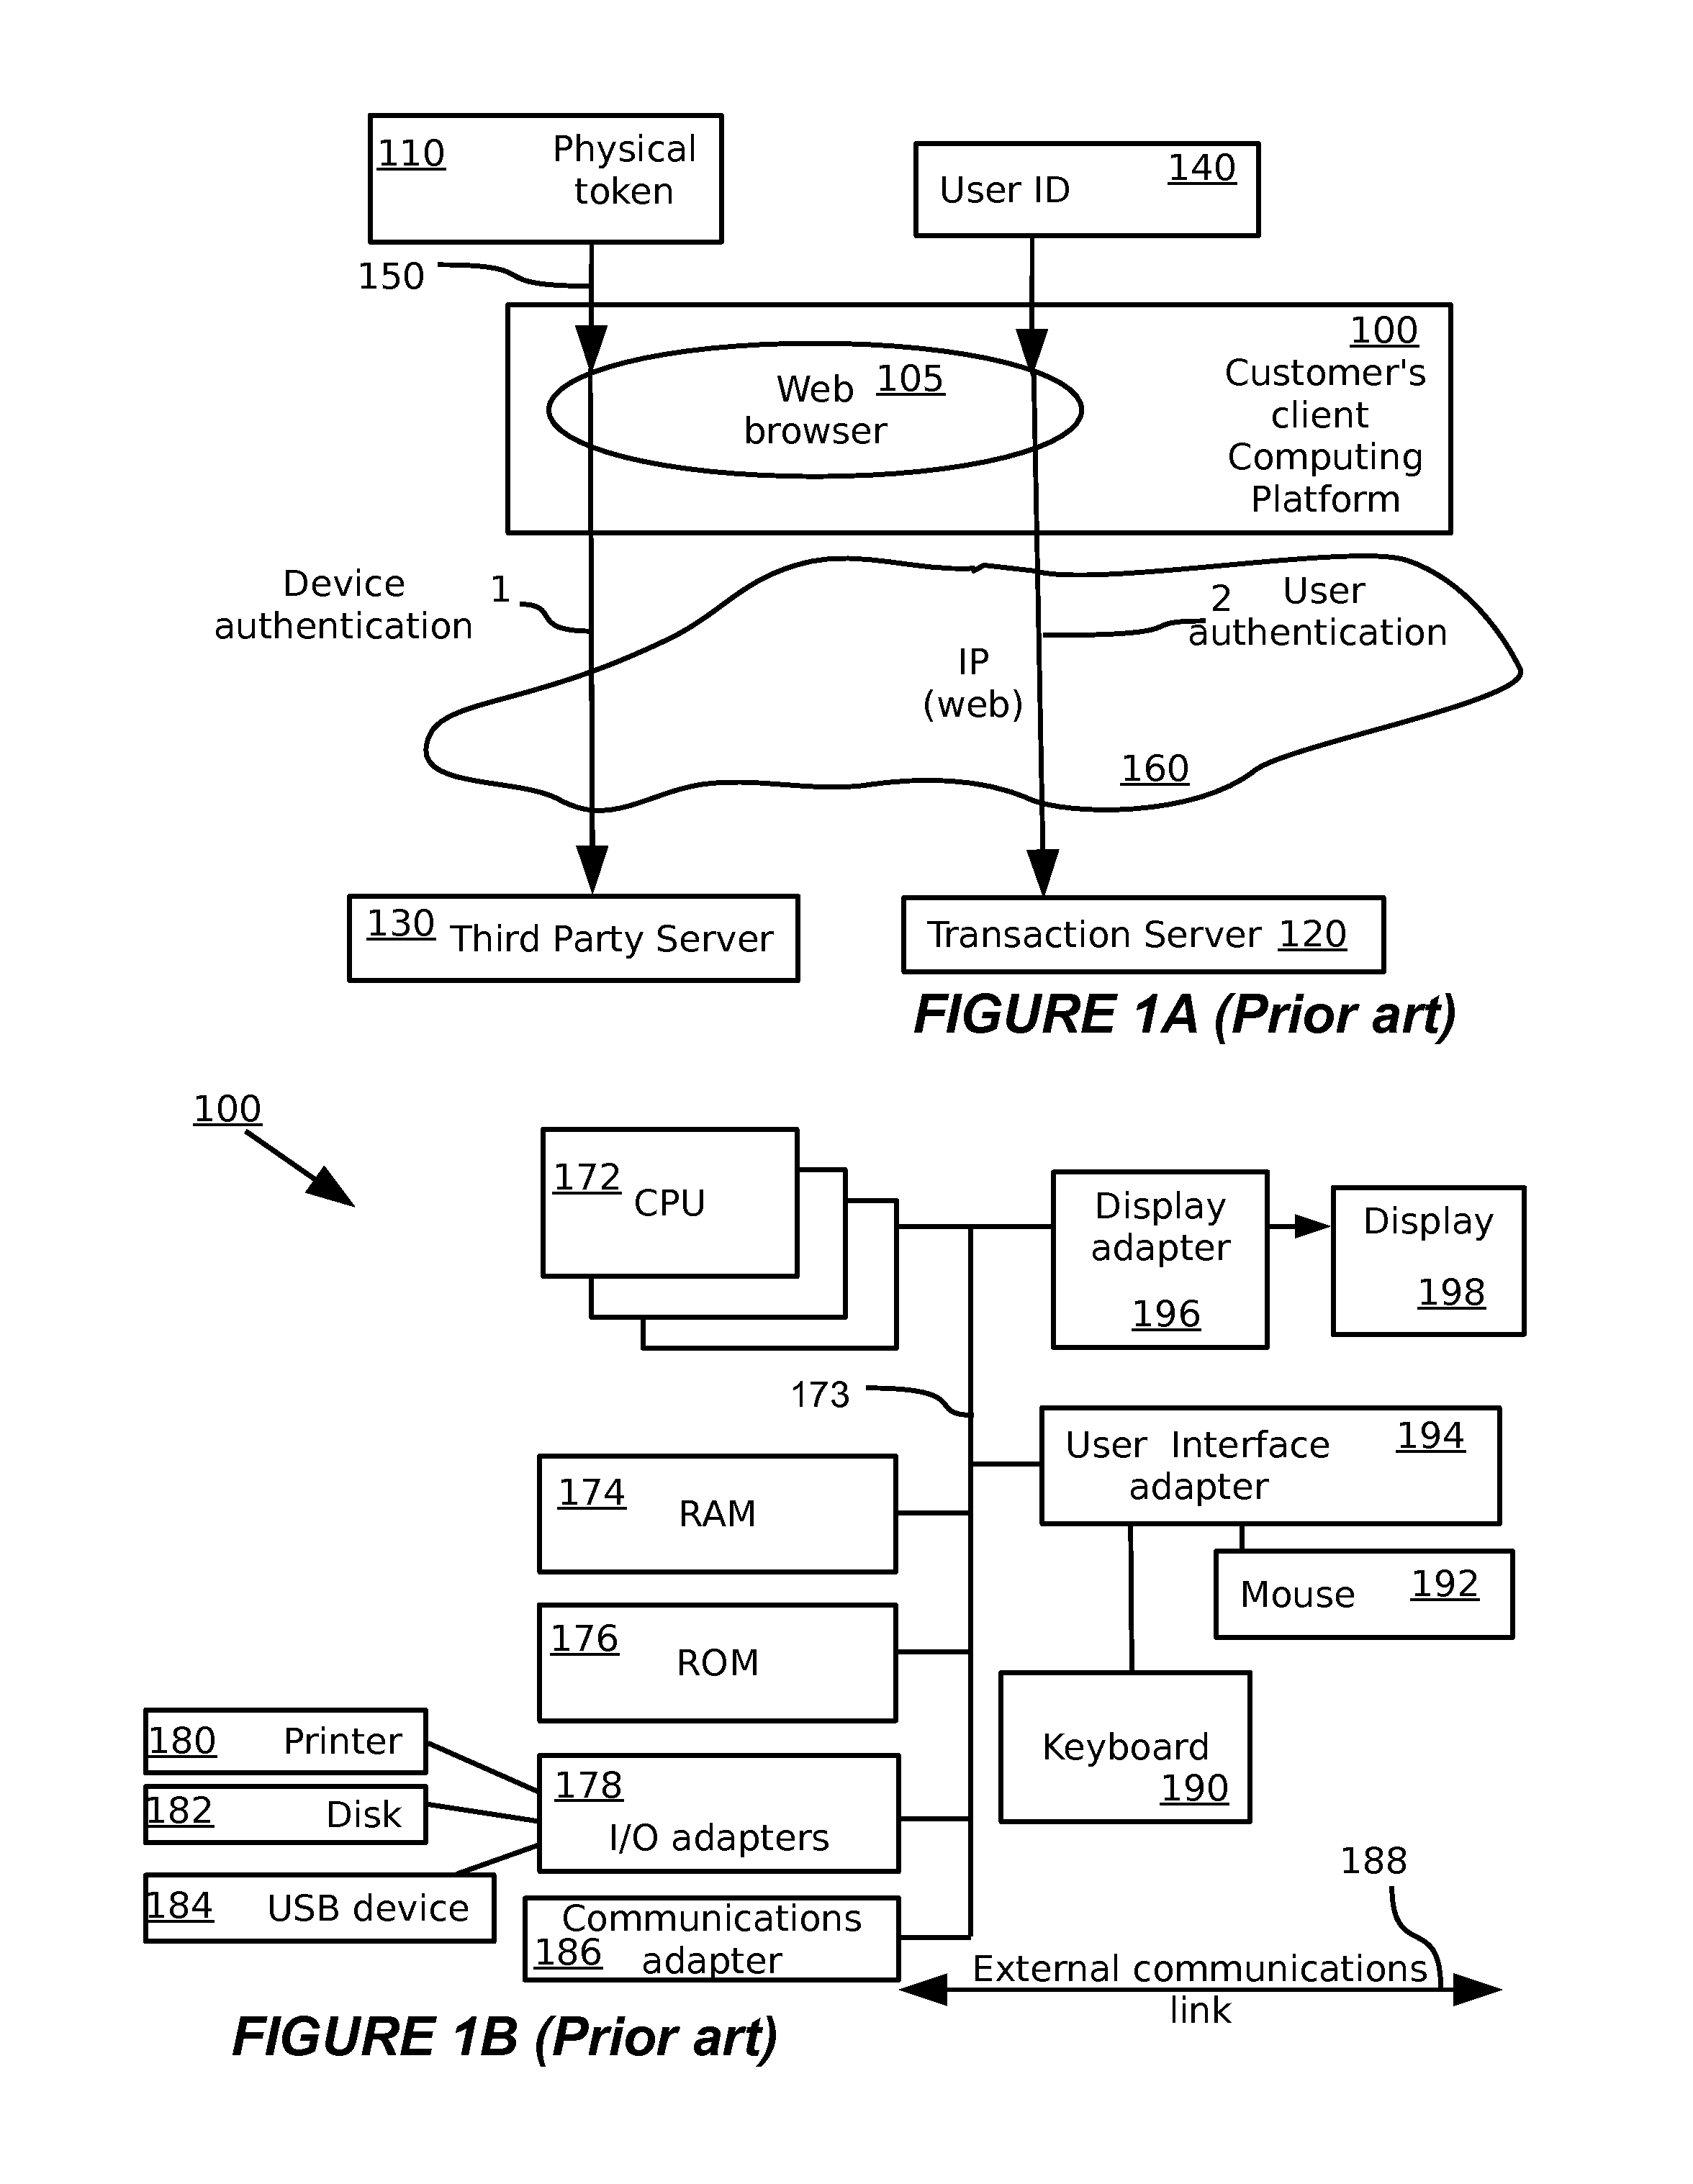 Method and system for authorizing secure electronic transactions using a security device